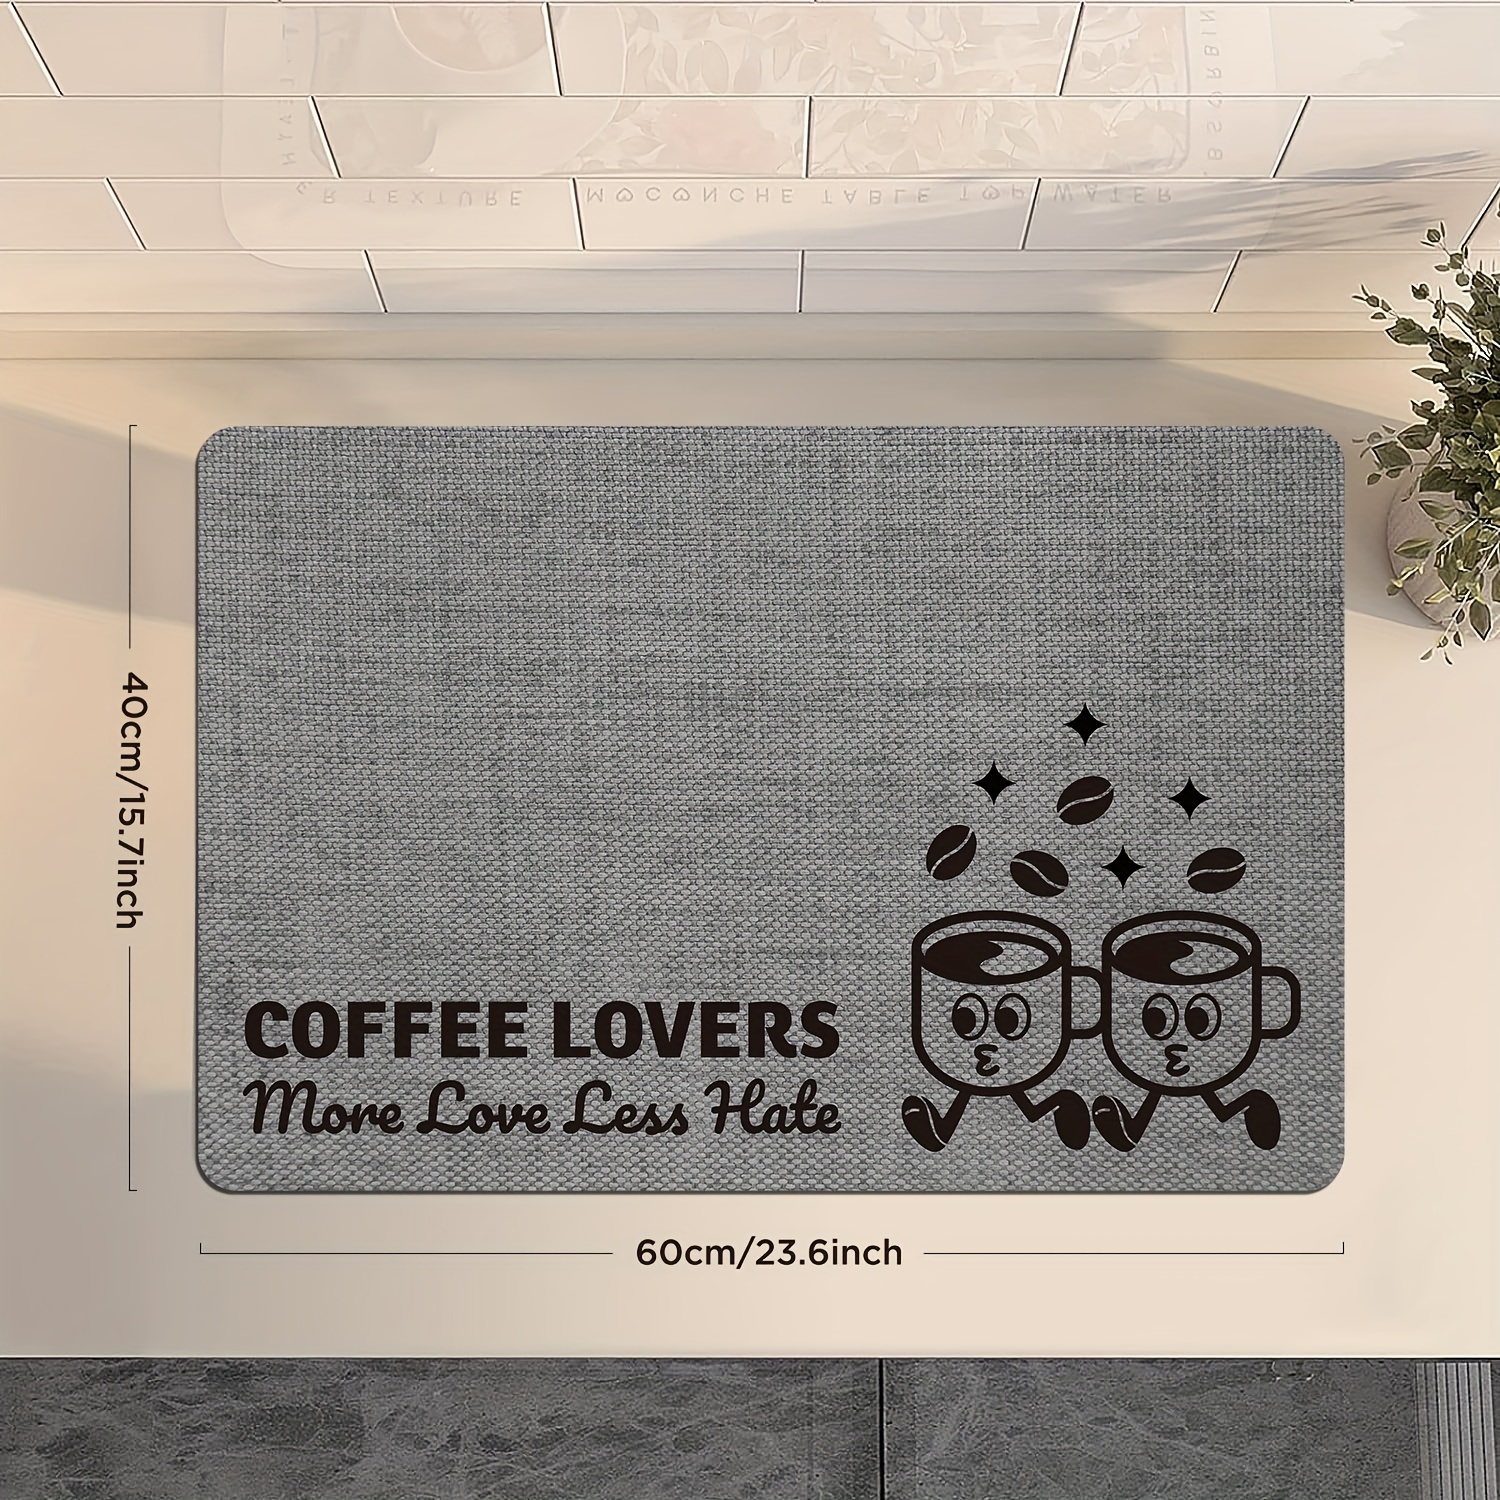 Mat Stain Absorbent Dish Drying Mat Kitchen Counter-Coffee Bar